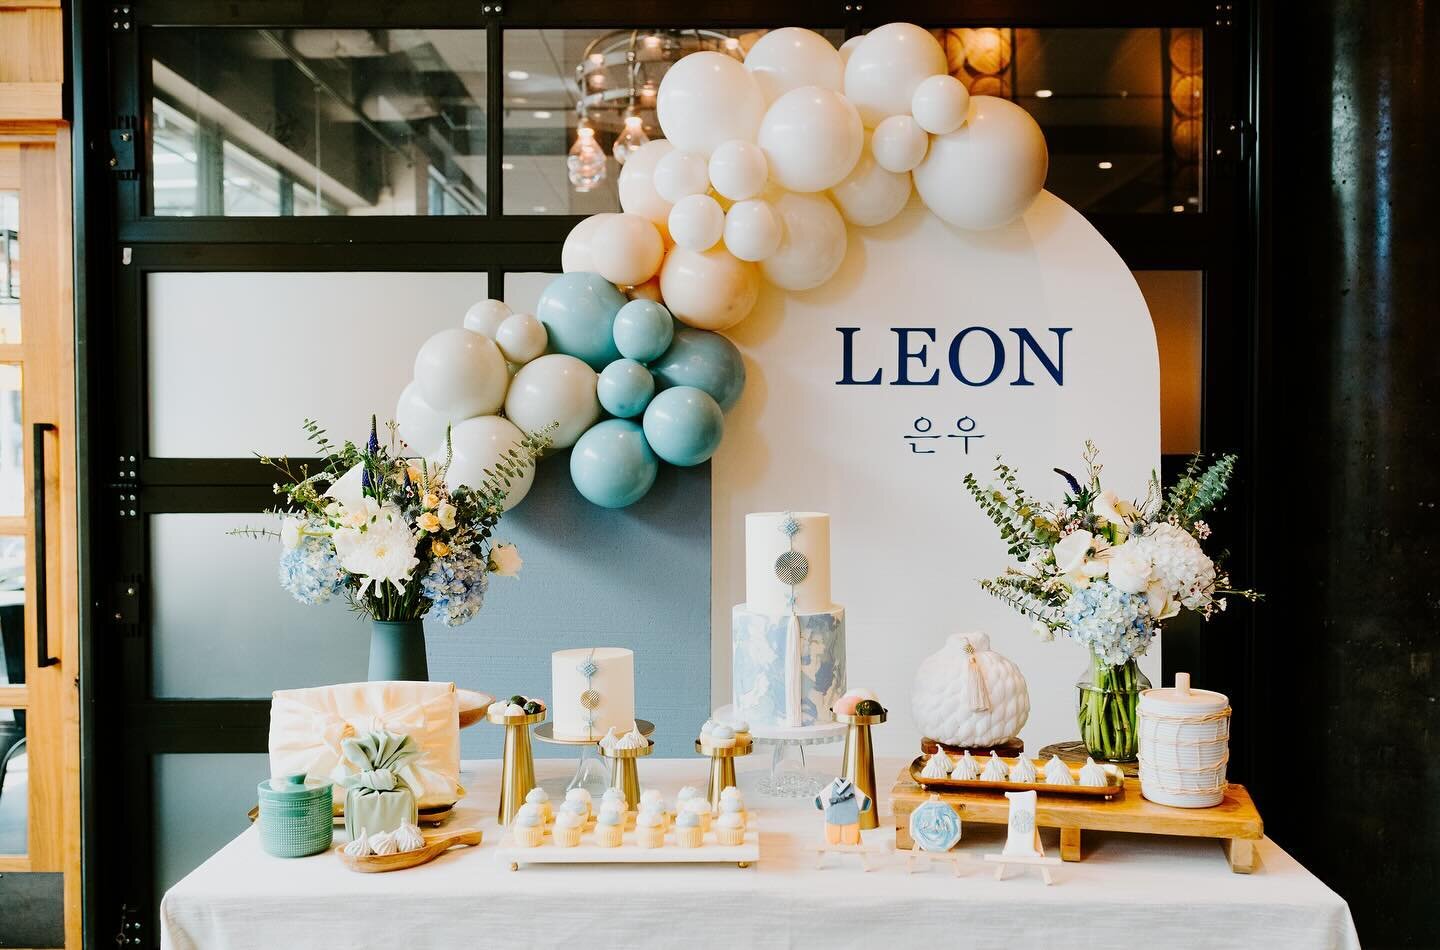 Korean first birthday spread for sweet baby Leon this past weekend 💙 

(gorgeous cake and sweets by @jankimgrumbles beautiful decor rentals @brightjoy.events )

#sneakpeek
#koreanfirstbirthday
#dohl
#seattlefamilyphotographer